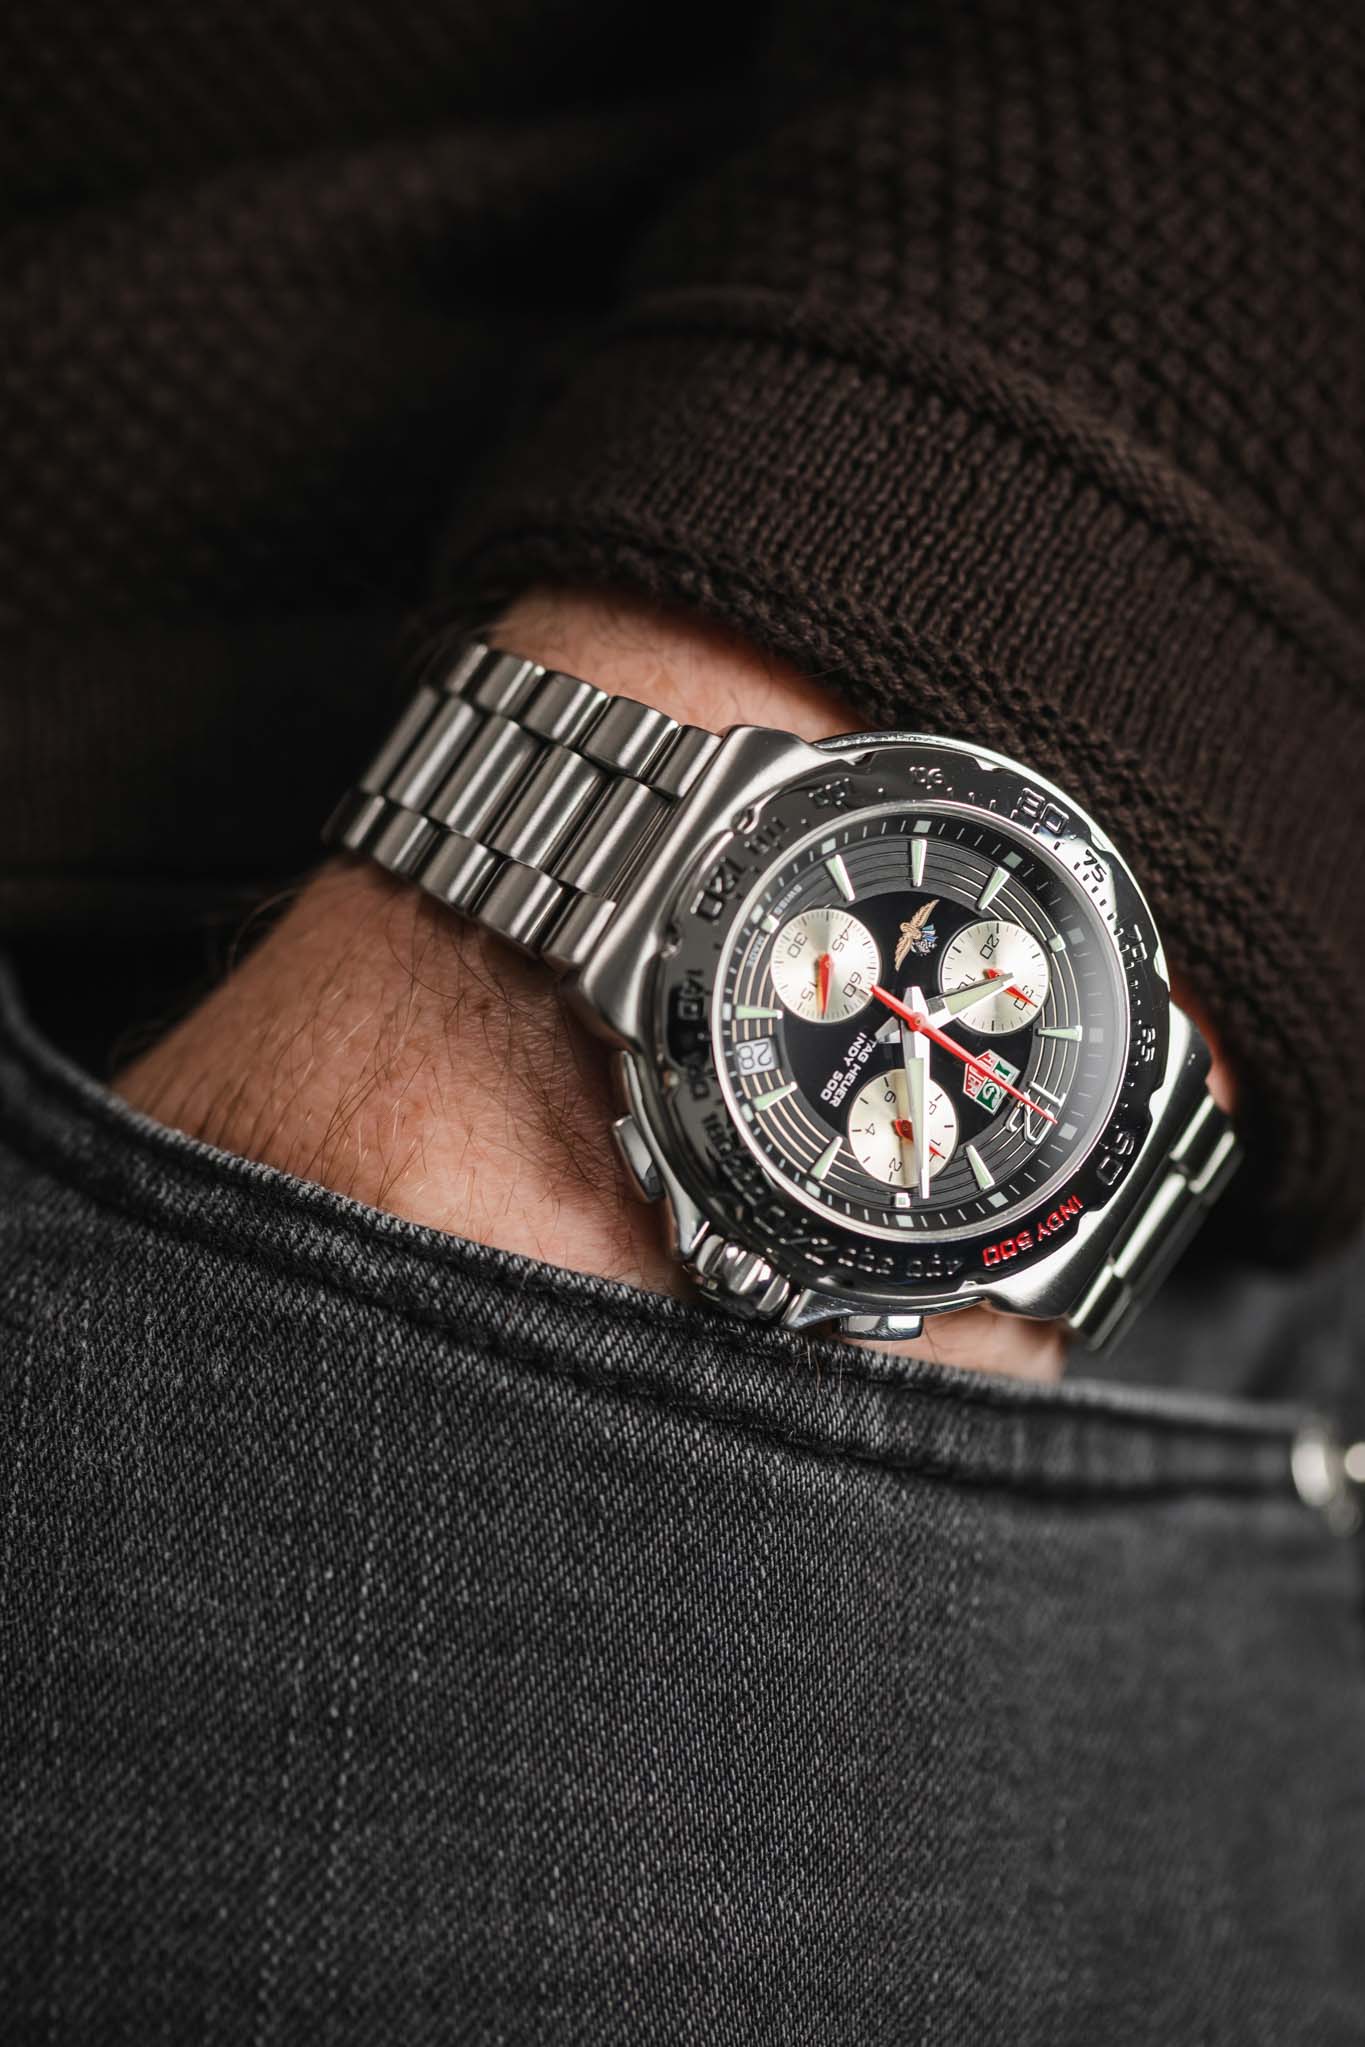 tag heuer indy 500 watch 